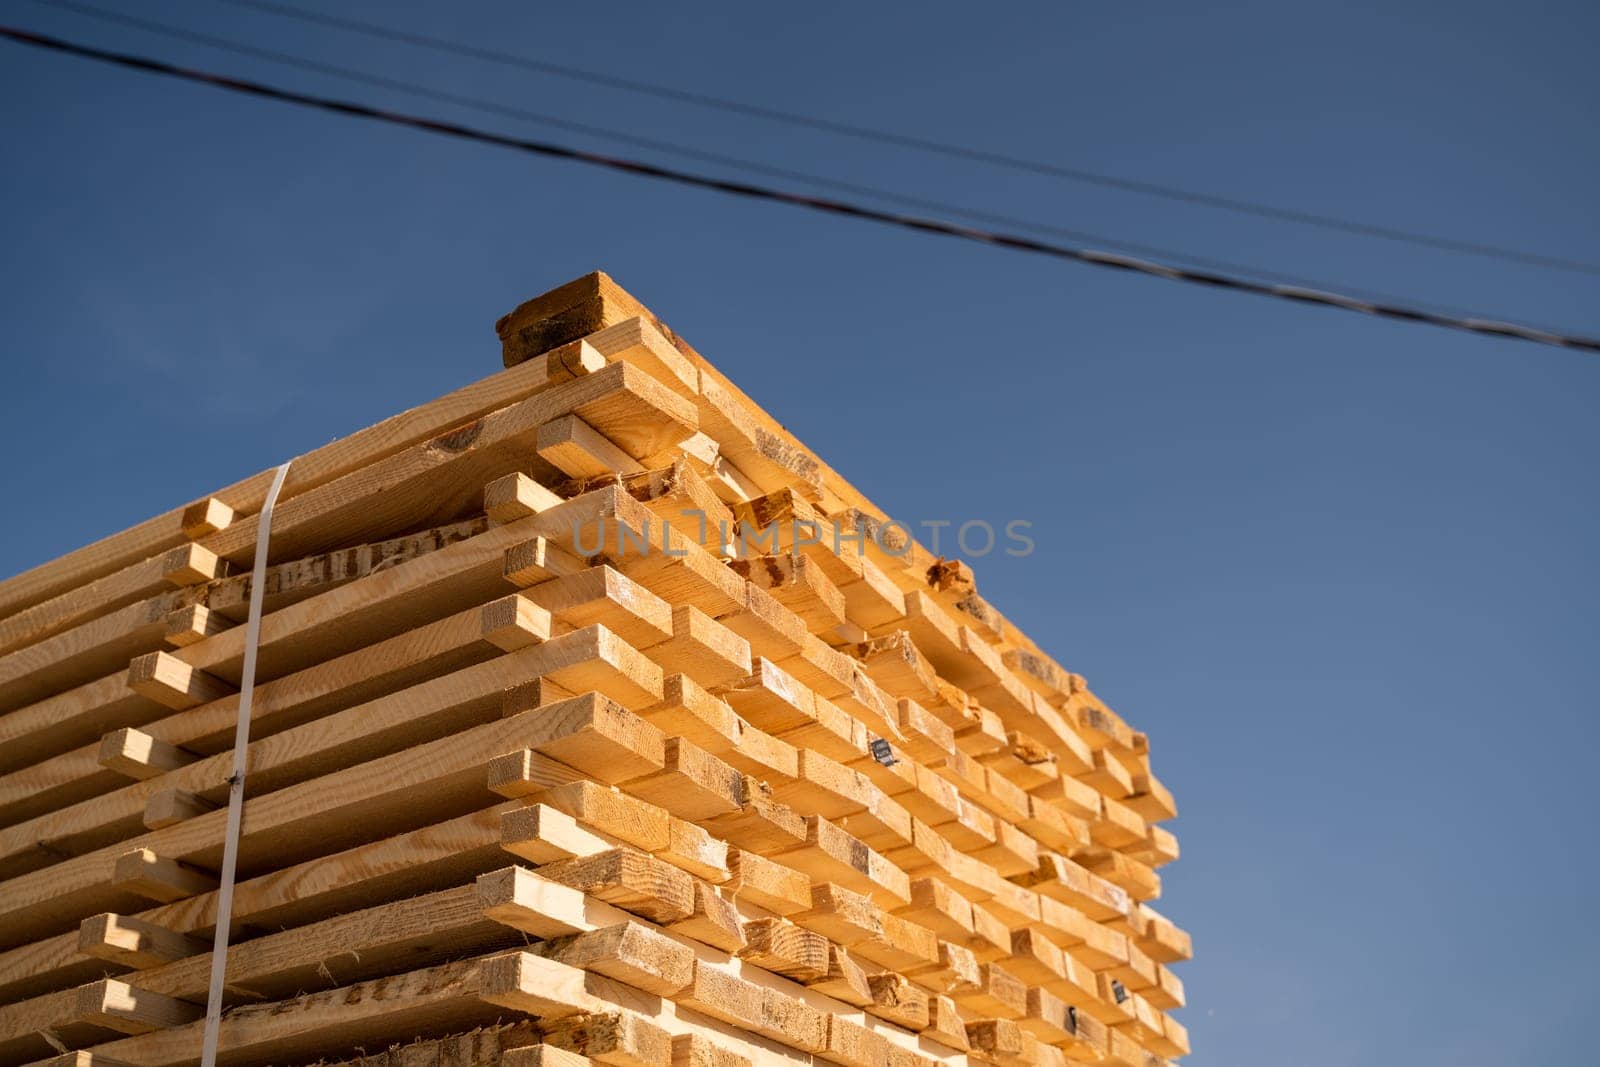 Stacked raw wooden boards at a outdoor lumber warehouse. Wood industry